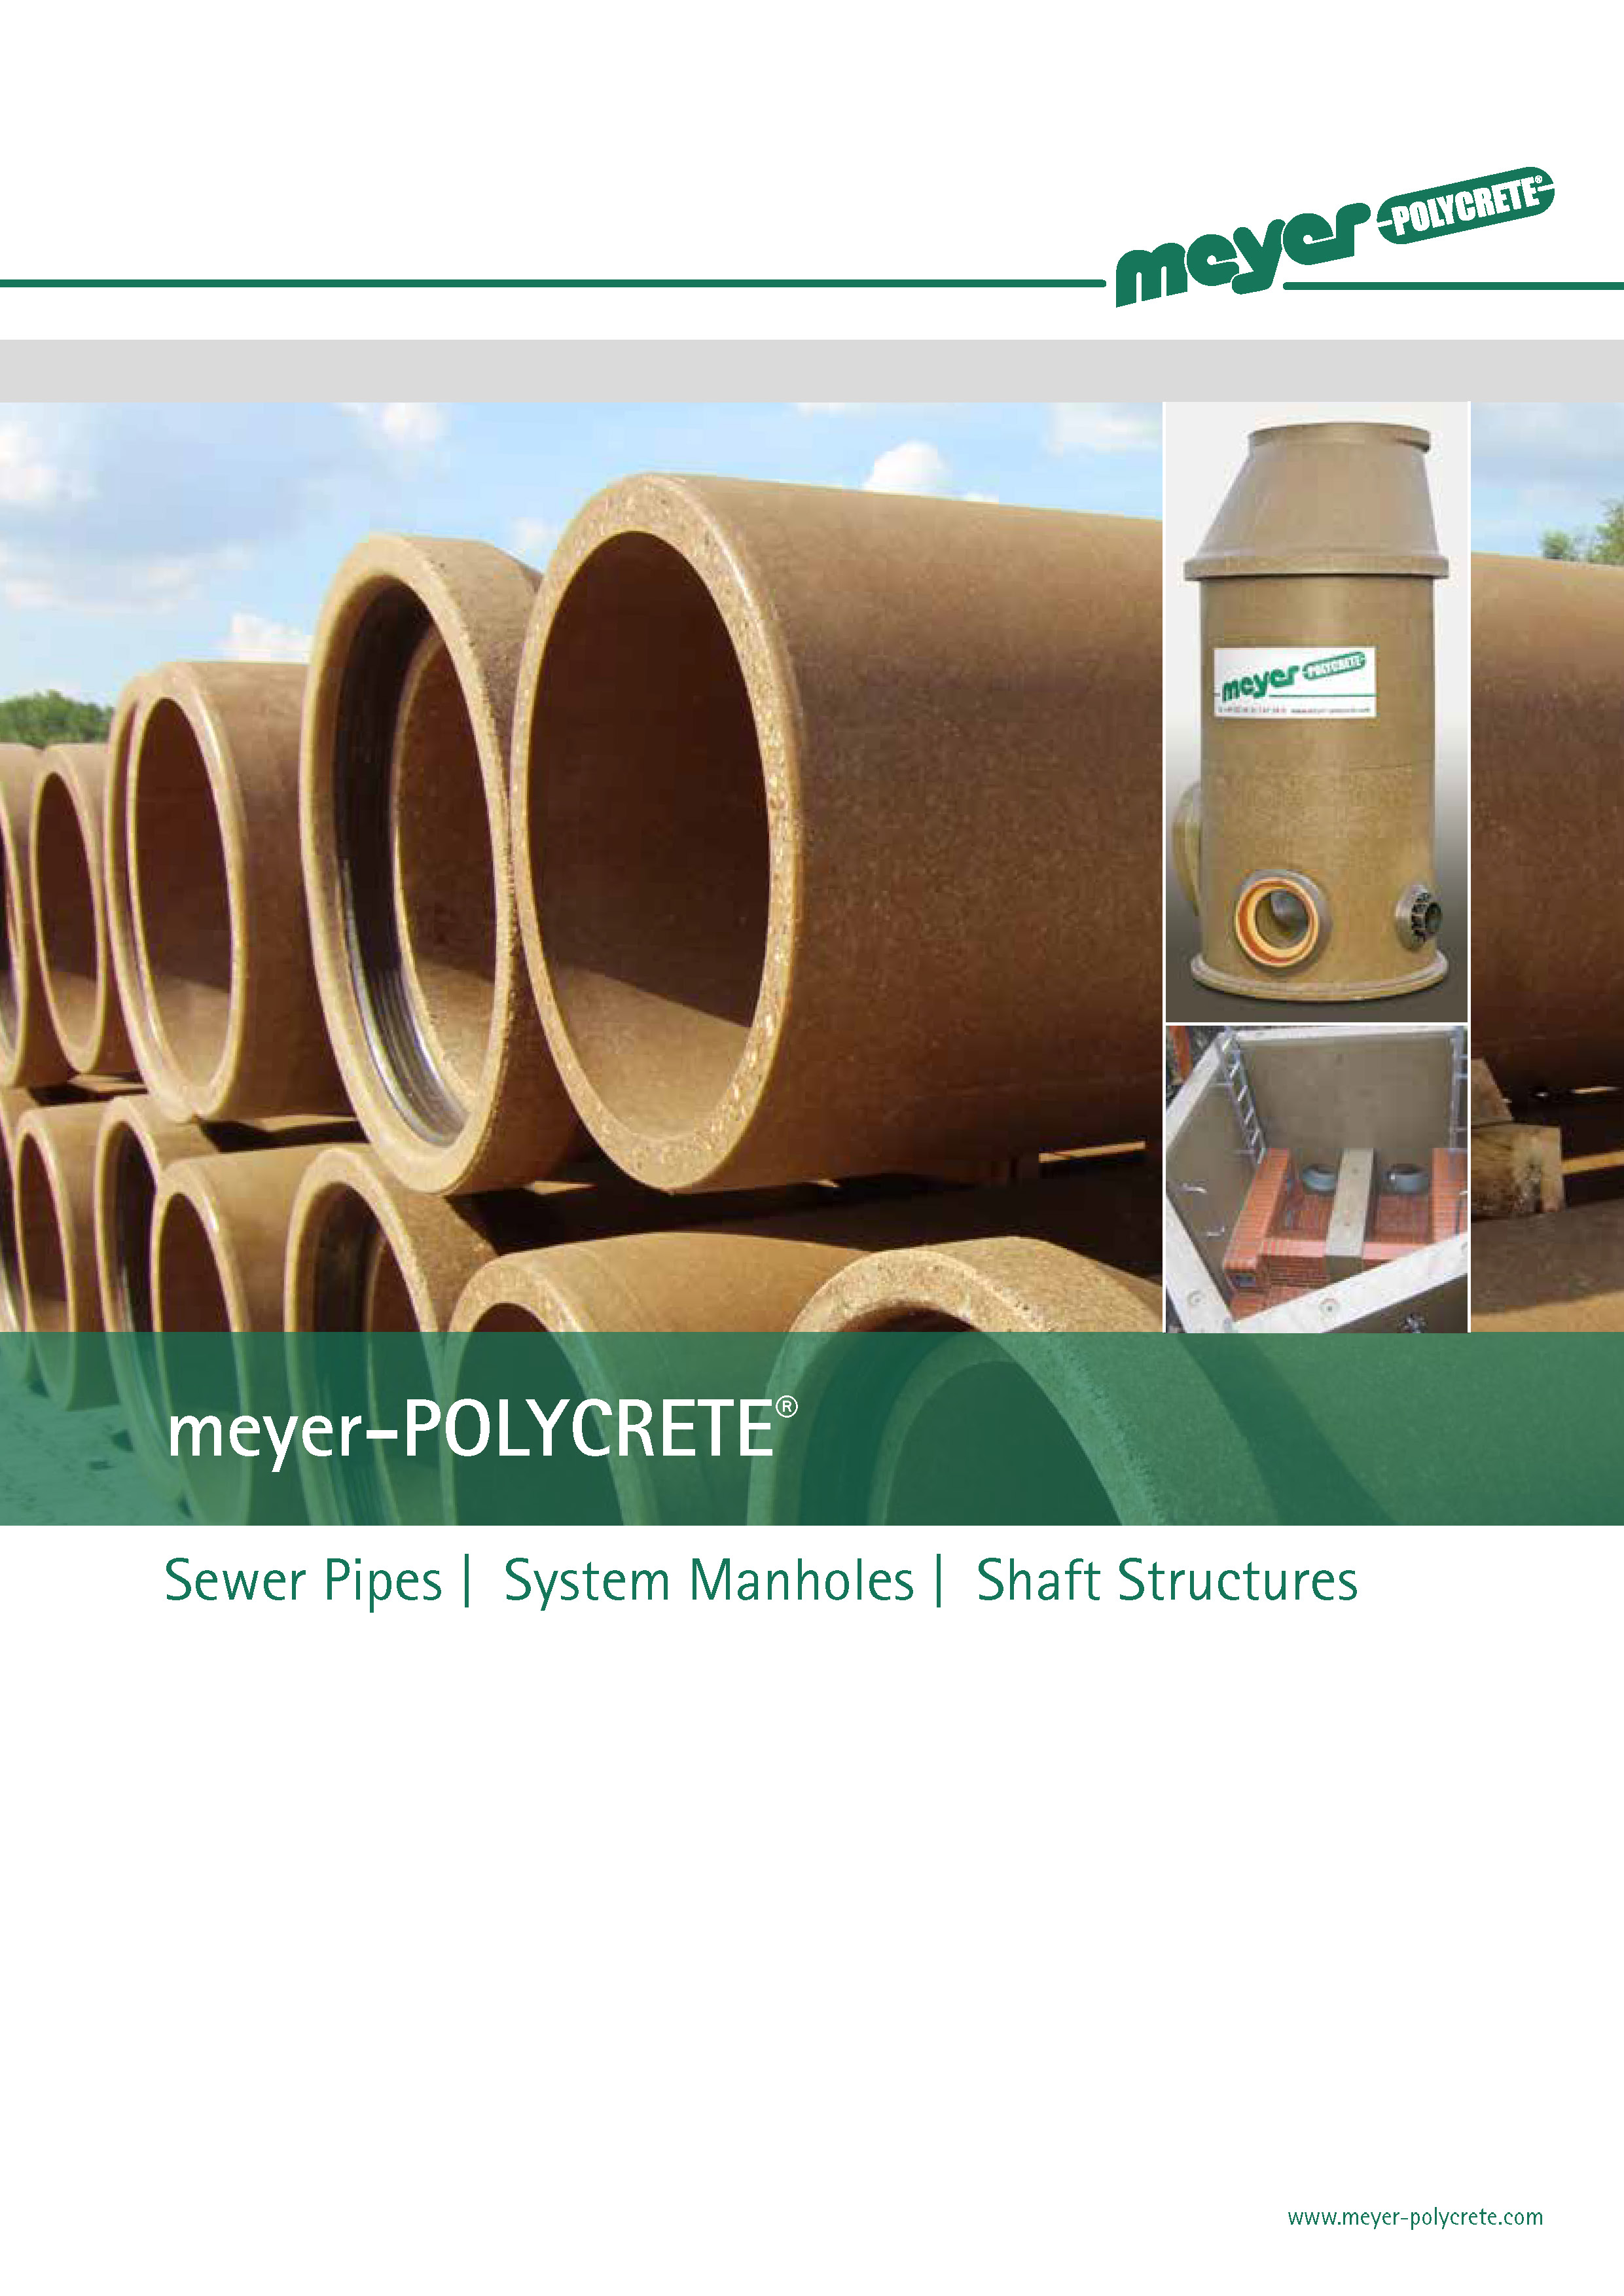 meyer POLYCRETE - Sewer pipes | System manholes | Shaft structures